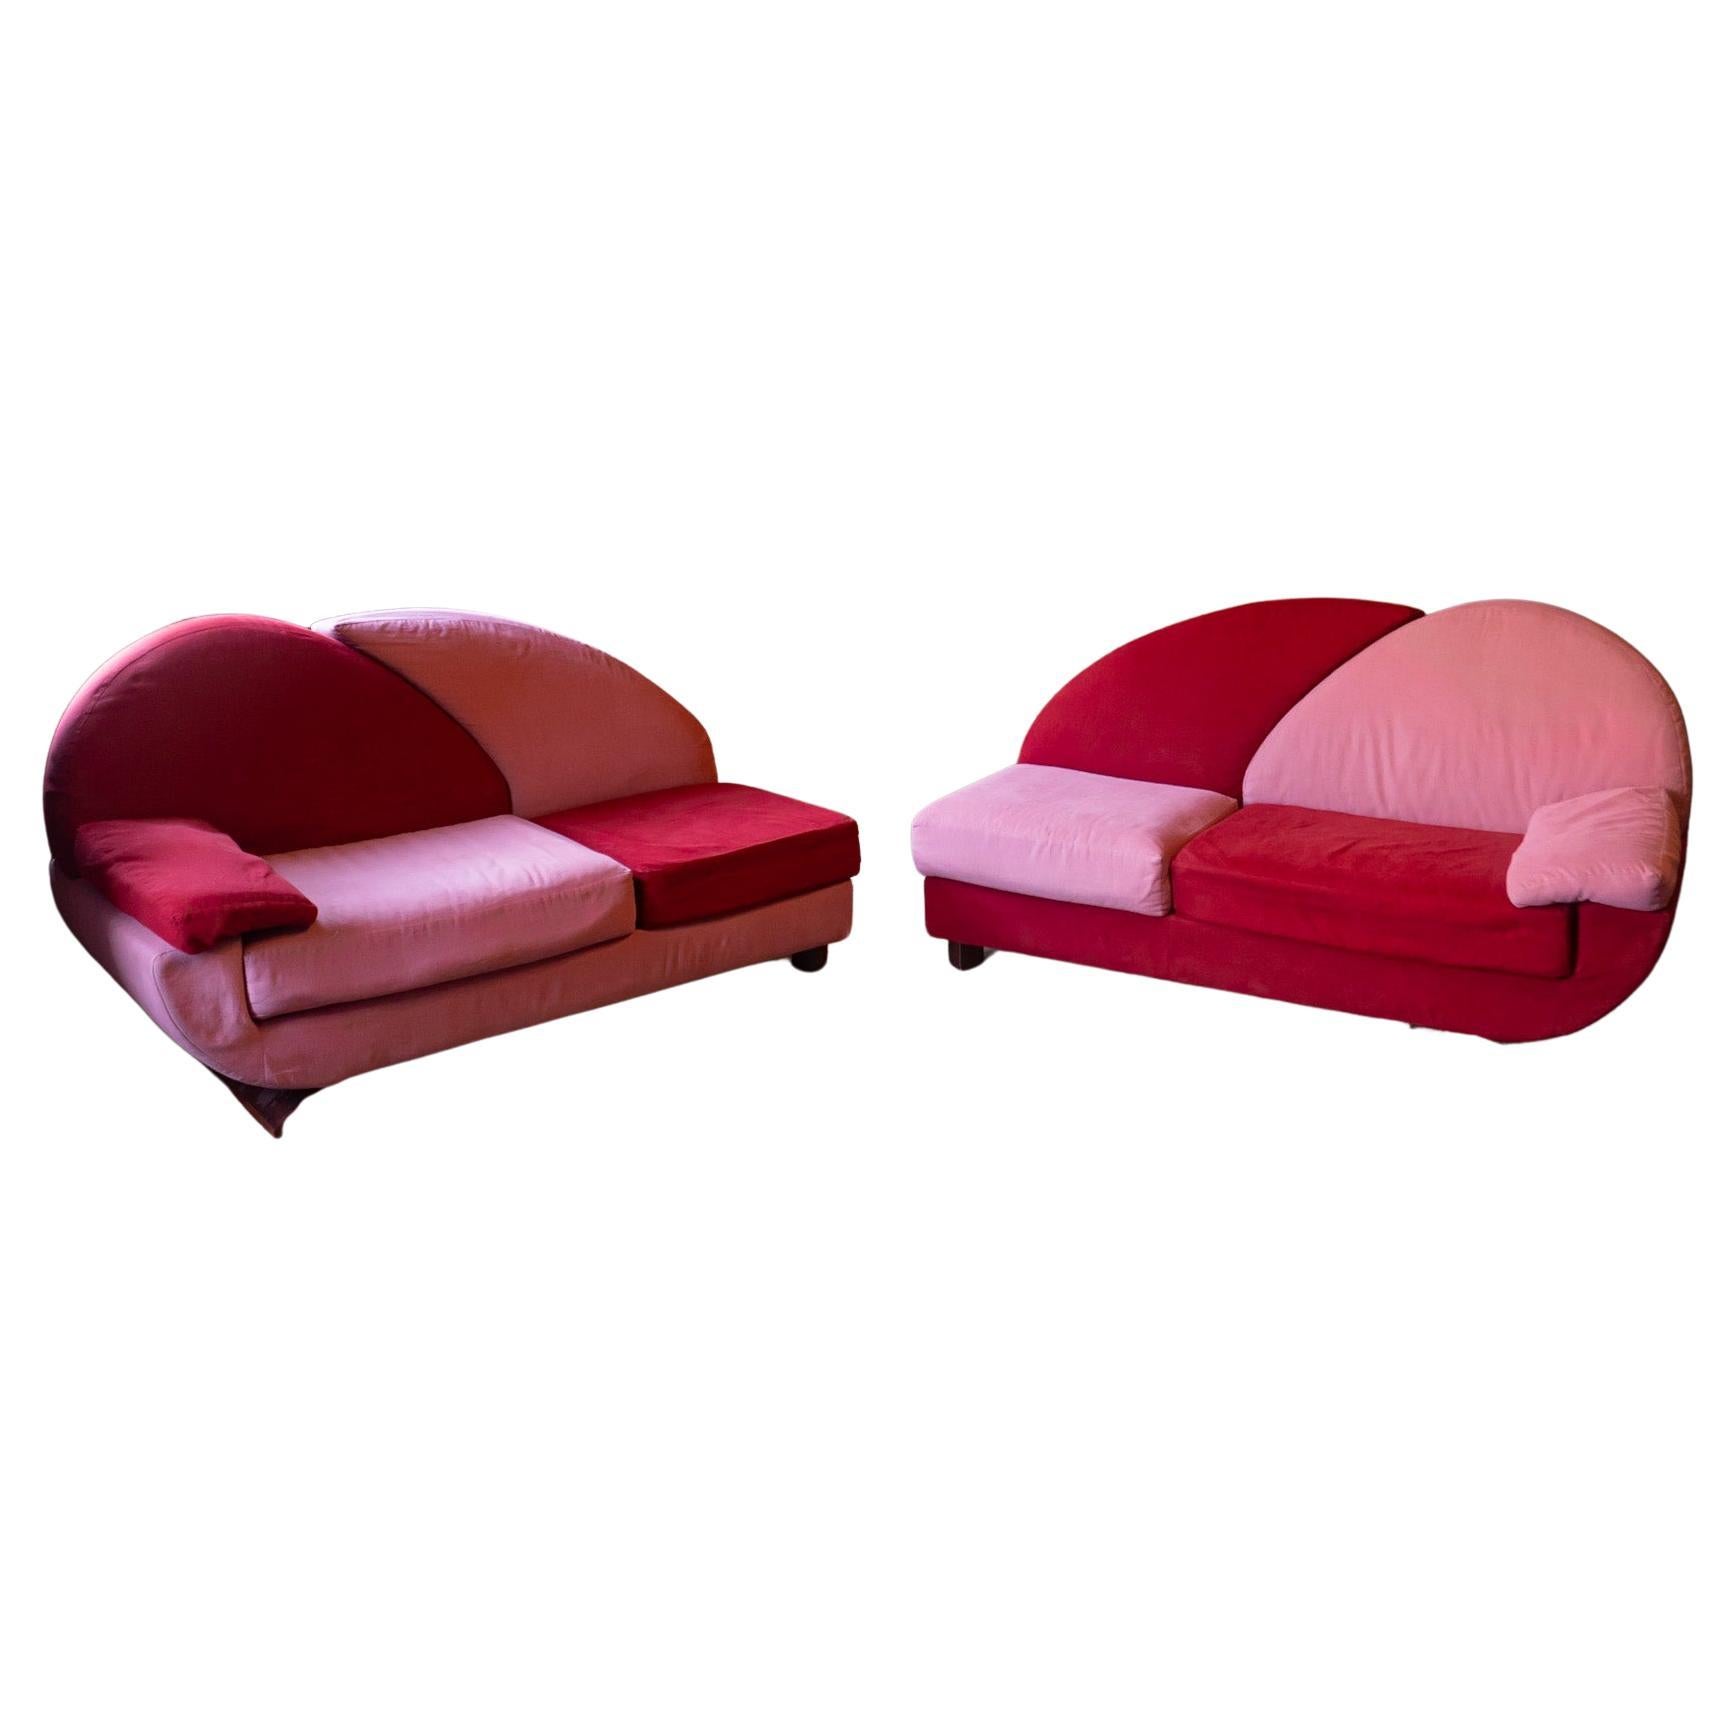 Post-Modern Pink and Red Alcantara Sofas, Italy, 1980s For Sale